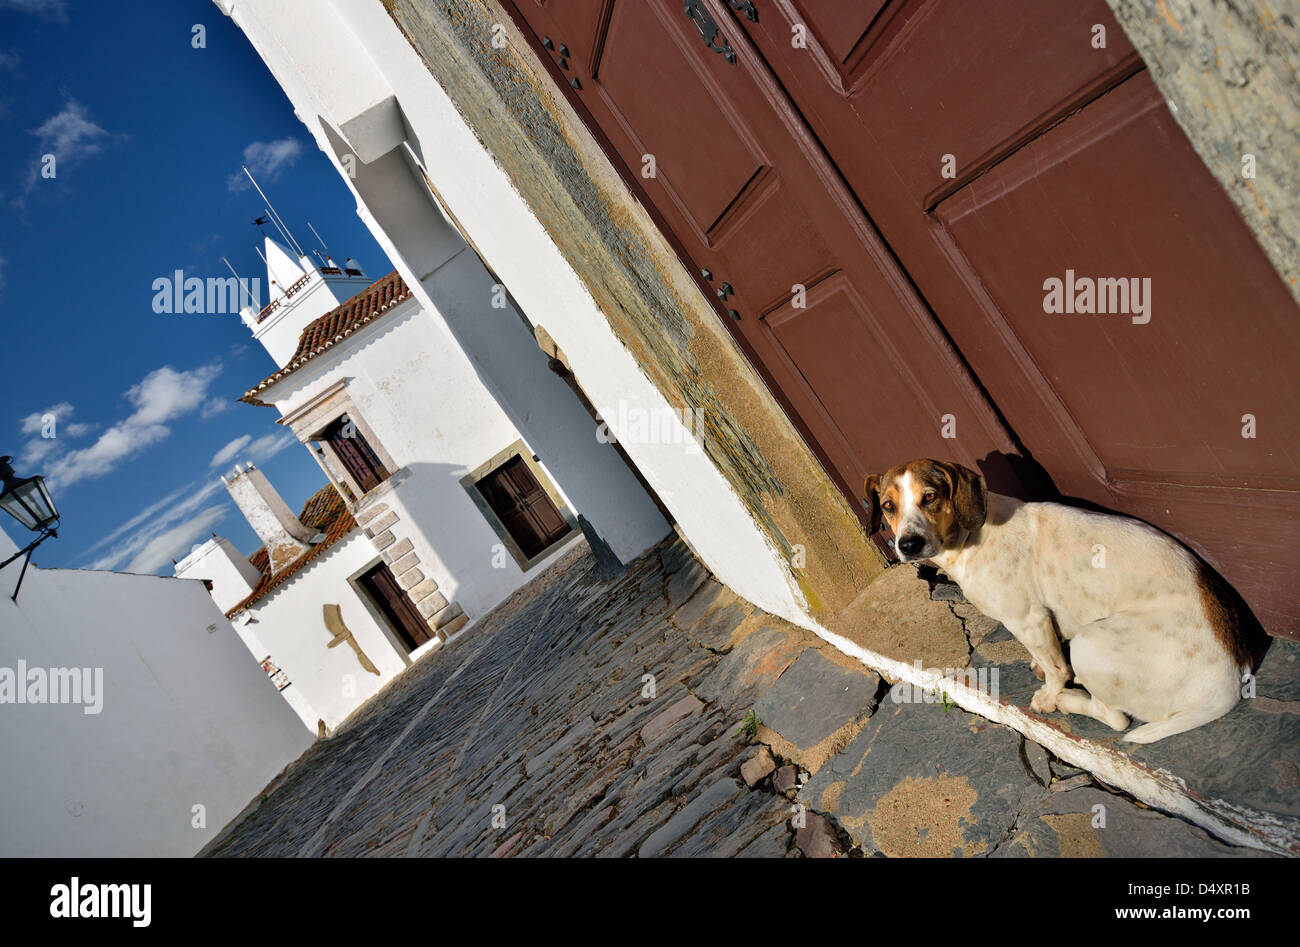 Portugal, Alentejo: Dog sitting in the entrance of a medieval house in historical village Monsaraz Stock Photo